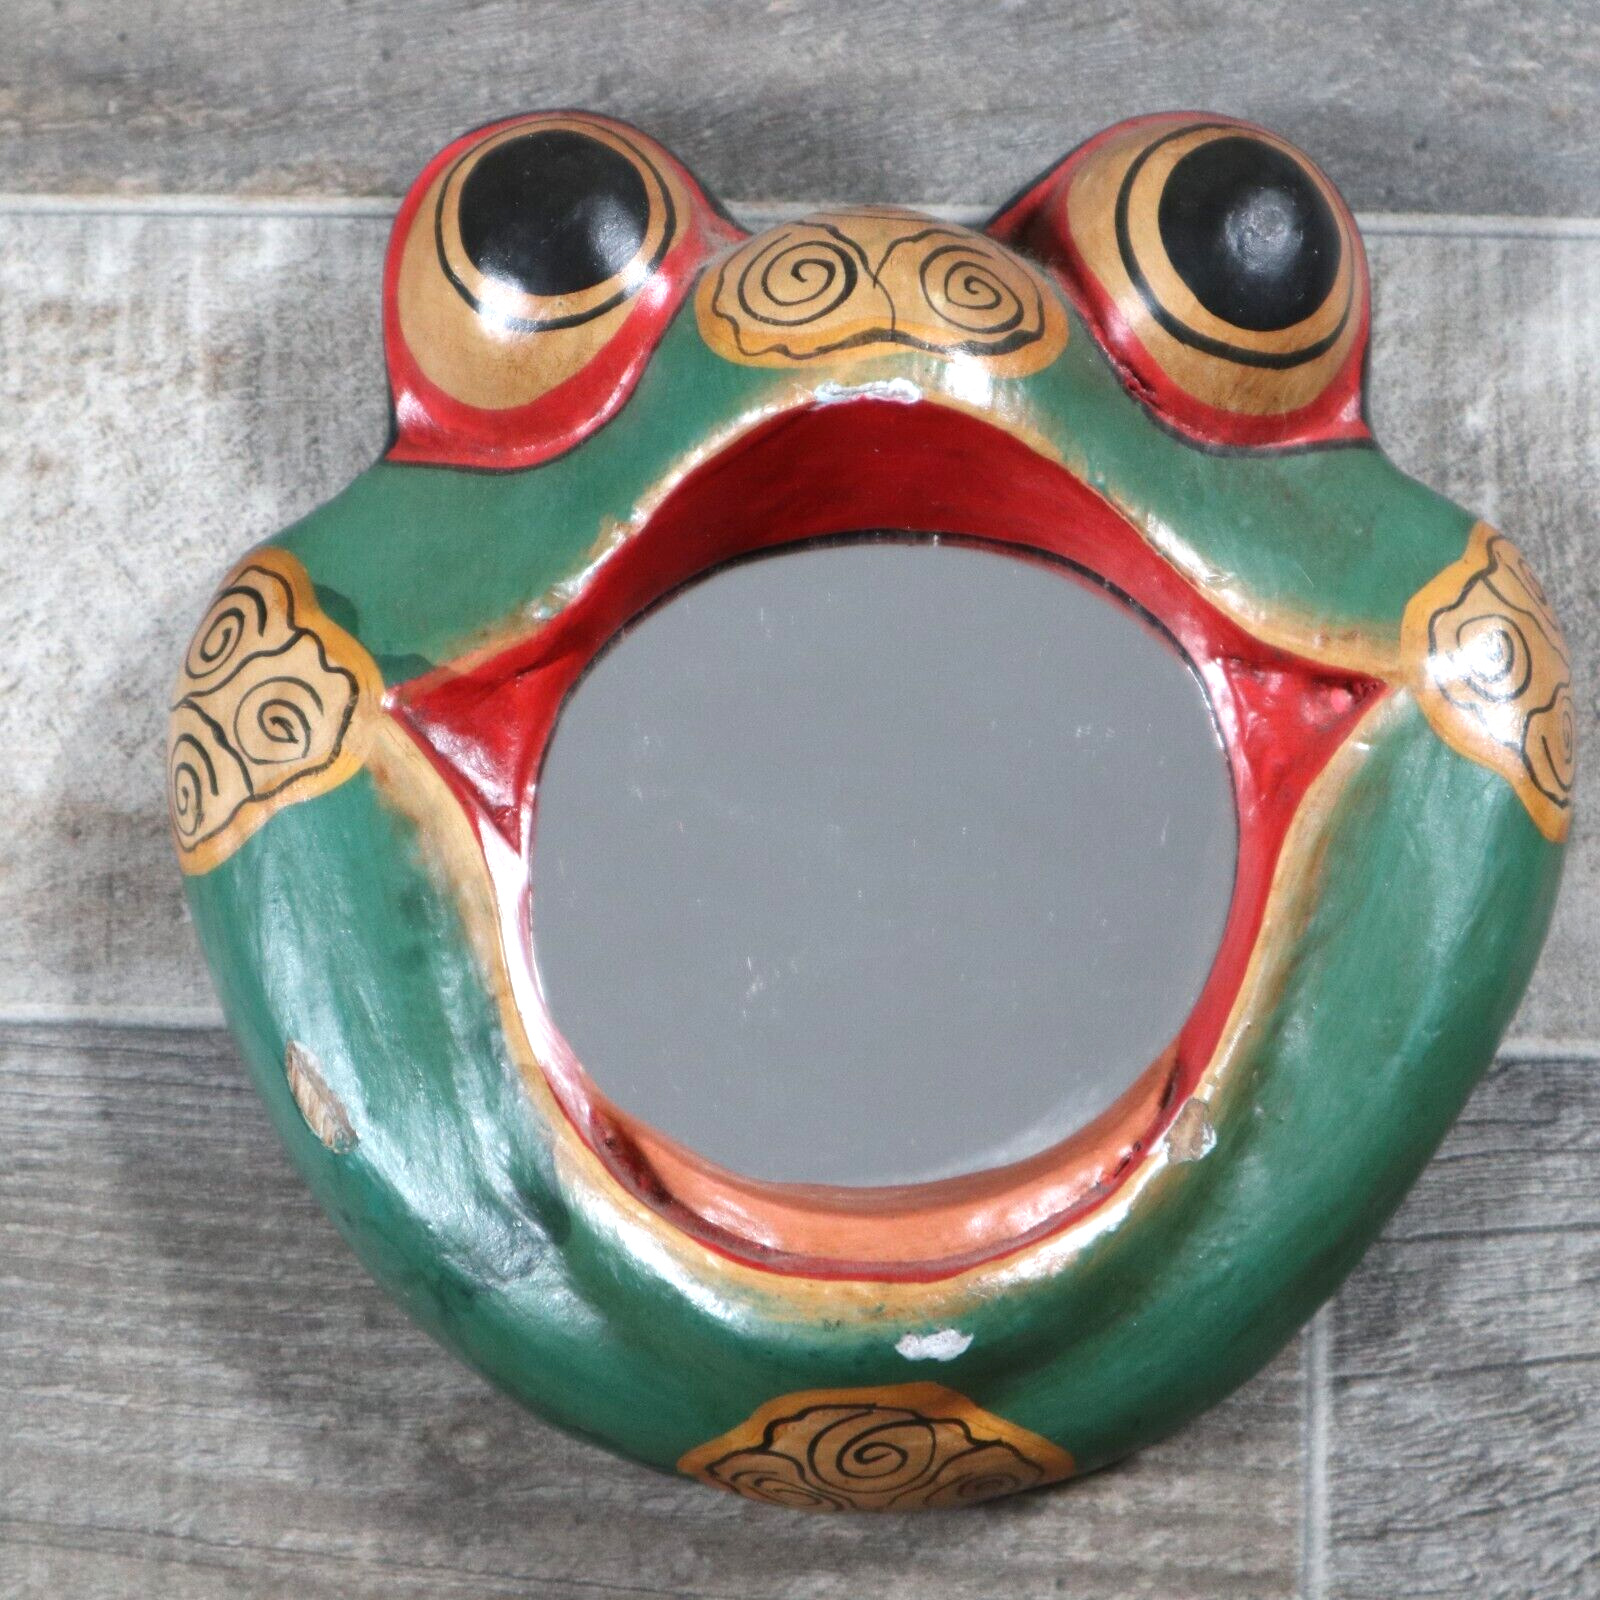 VTG Indonesian Frog Mirror Folk Art Hand Painted Carved Wooden Wall Decor Funky